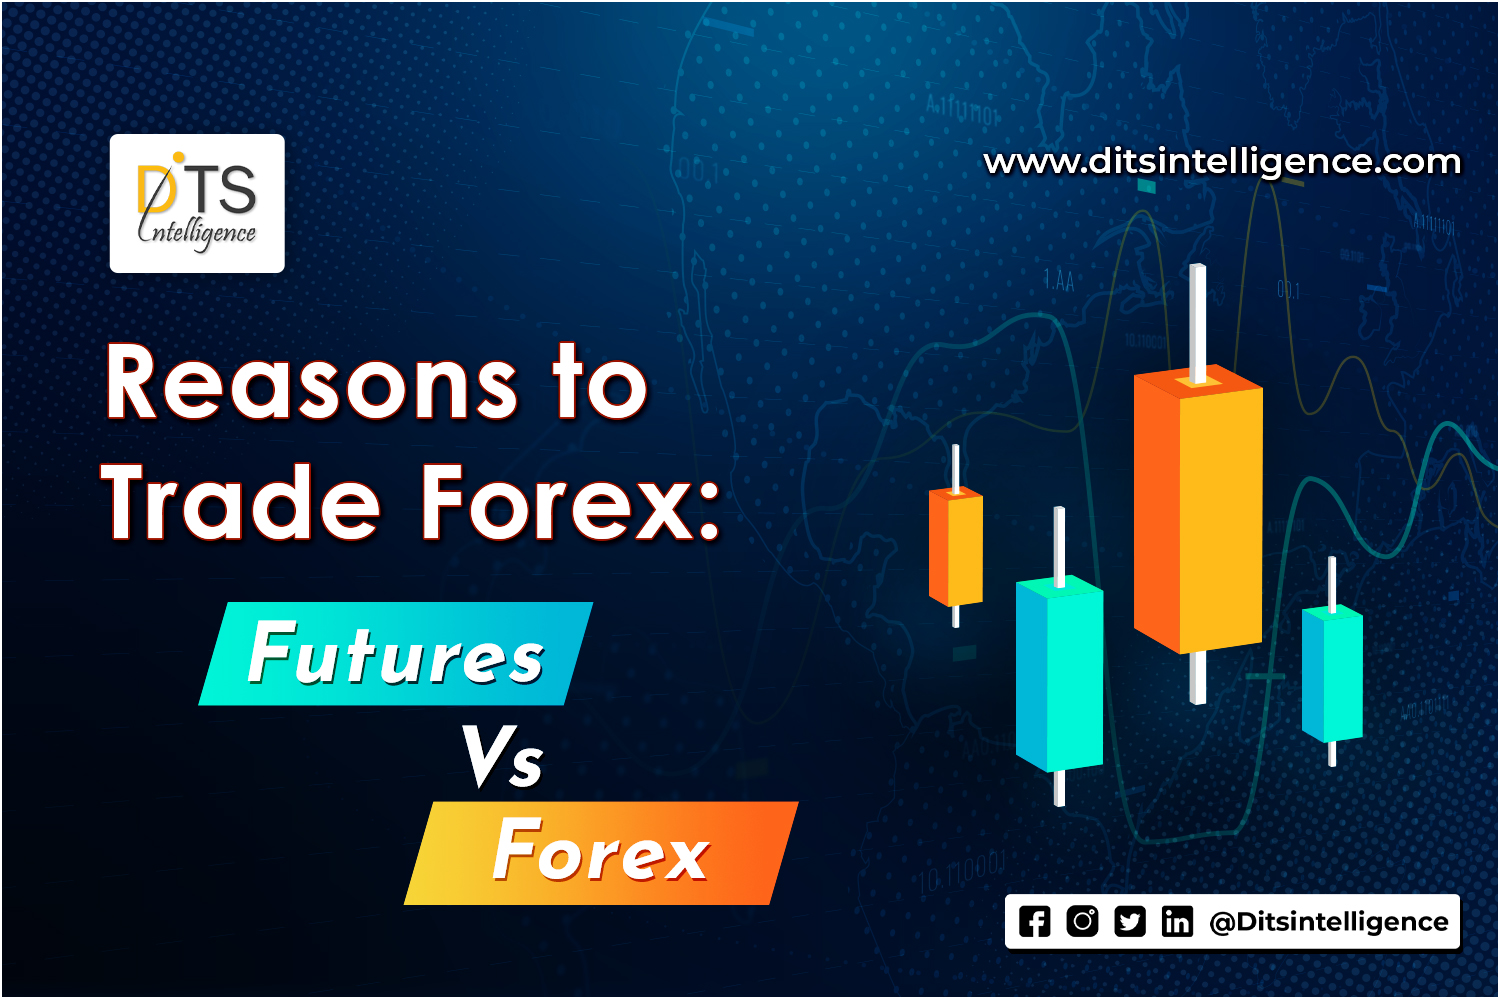 Reasons to Trade Forex Futures vs Forex